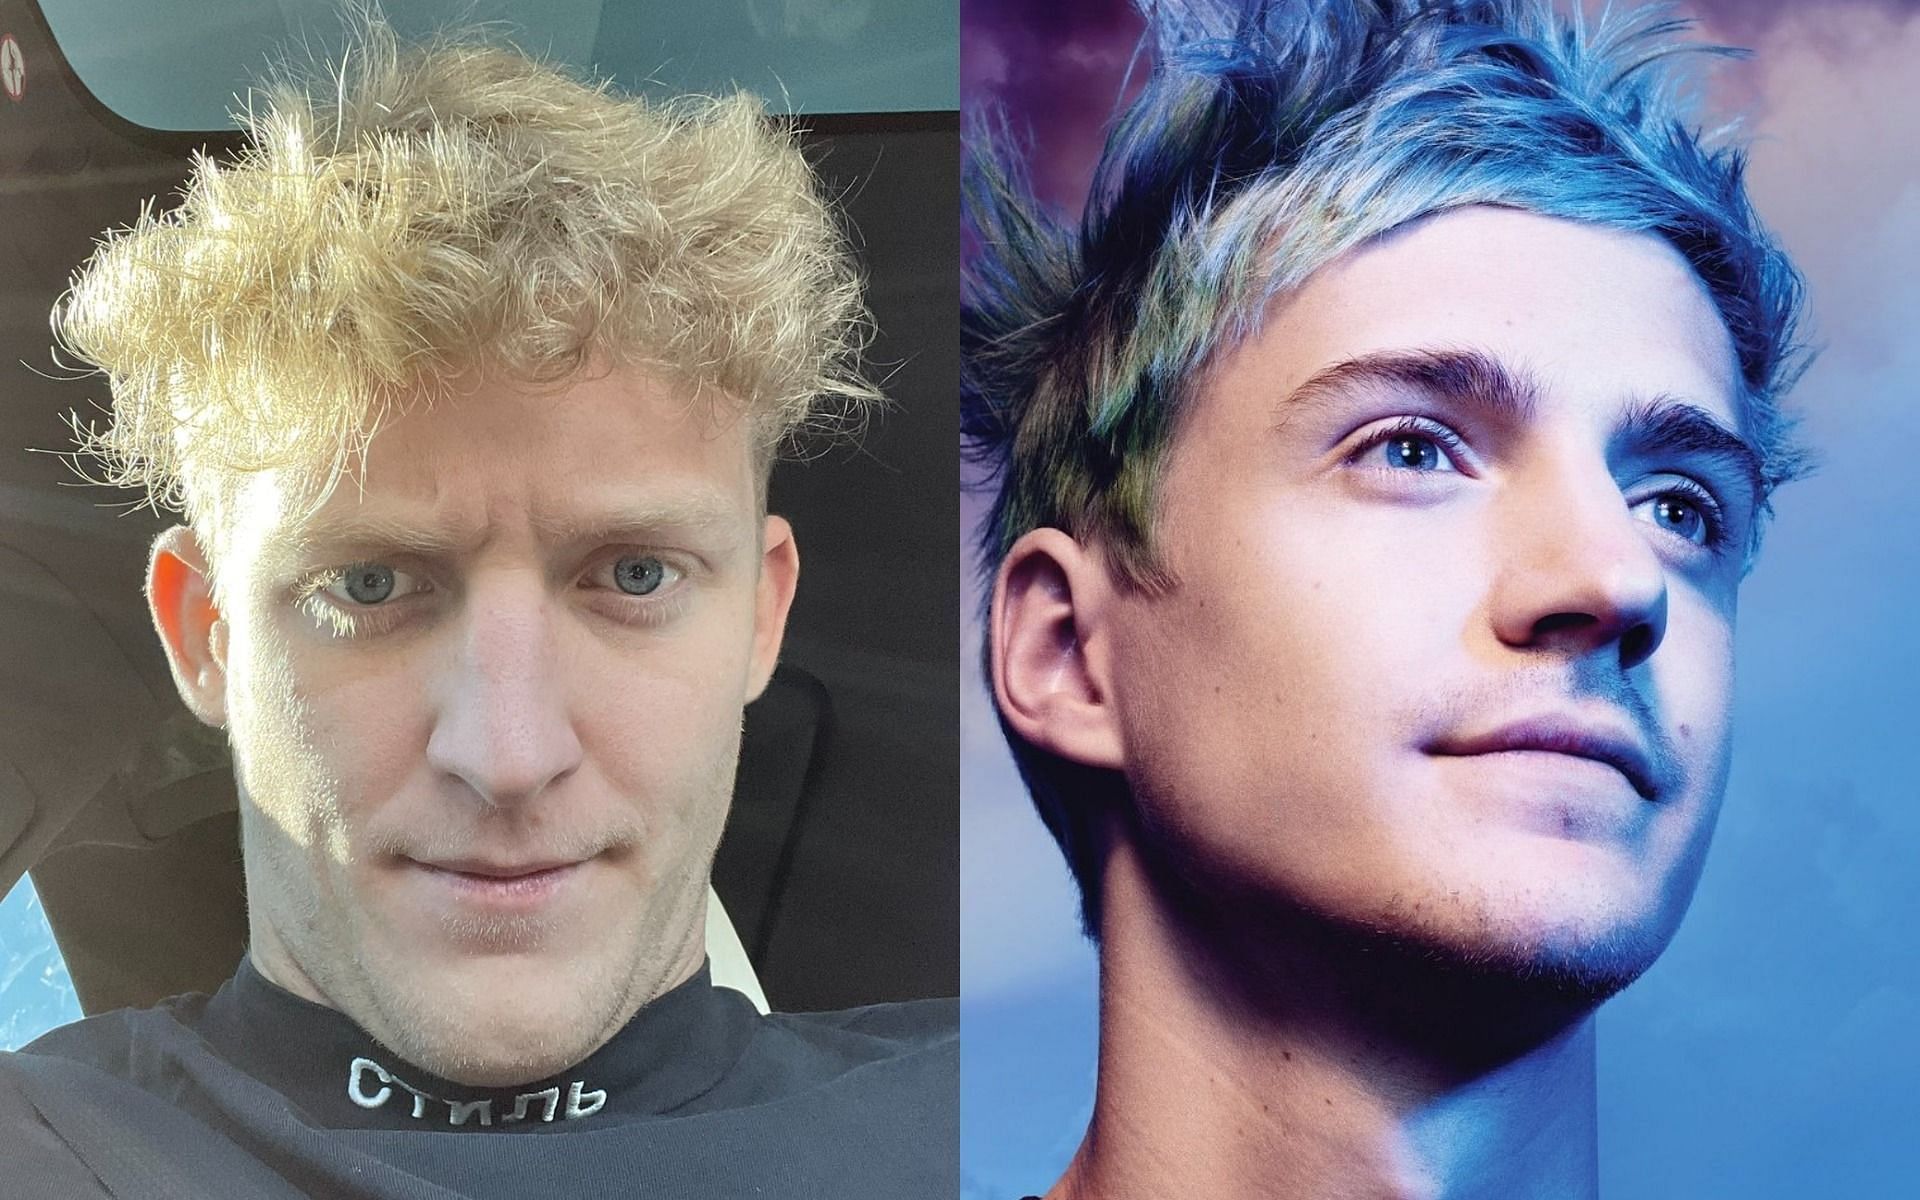 Ninja and Tfue are seemingly on good terms after the previous argument on Twitter (Images via @Tfue/@Ninja/Twitter)